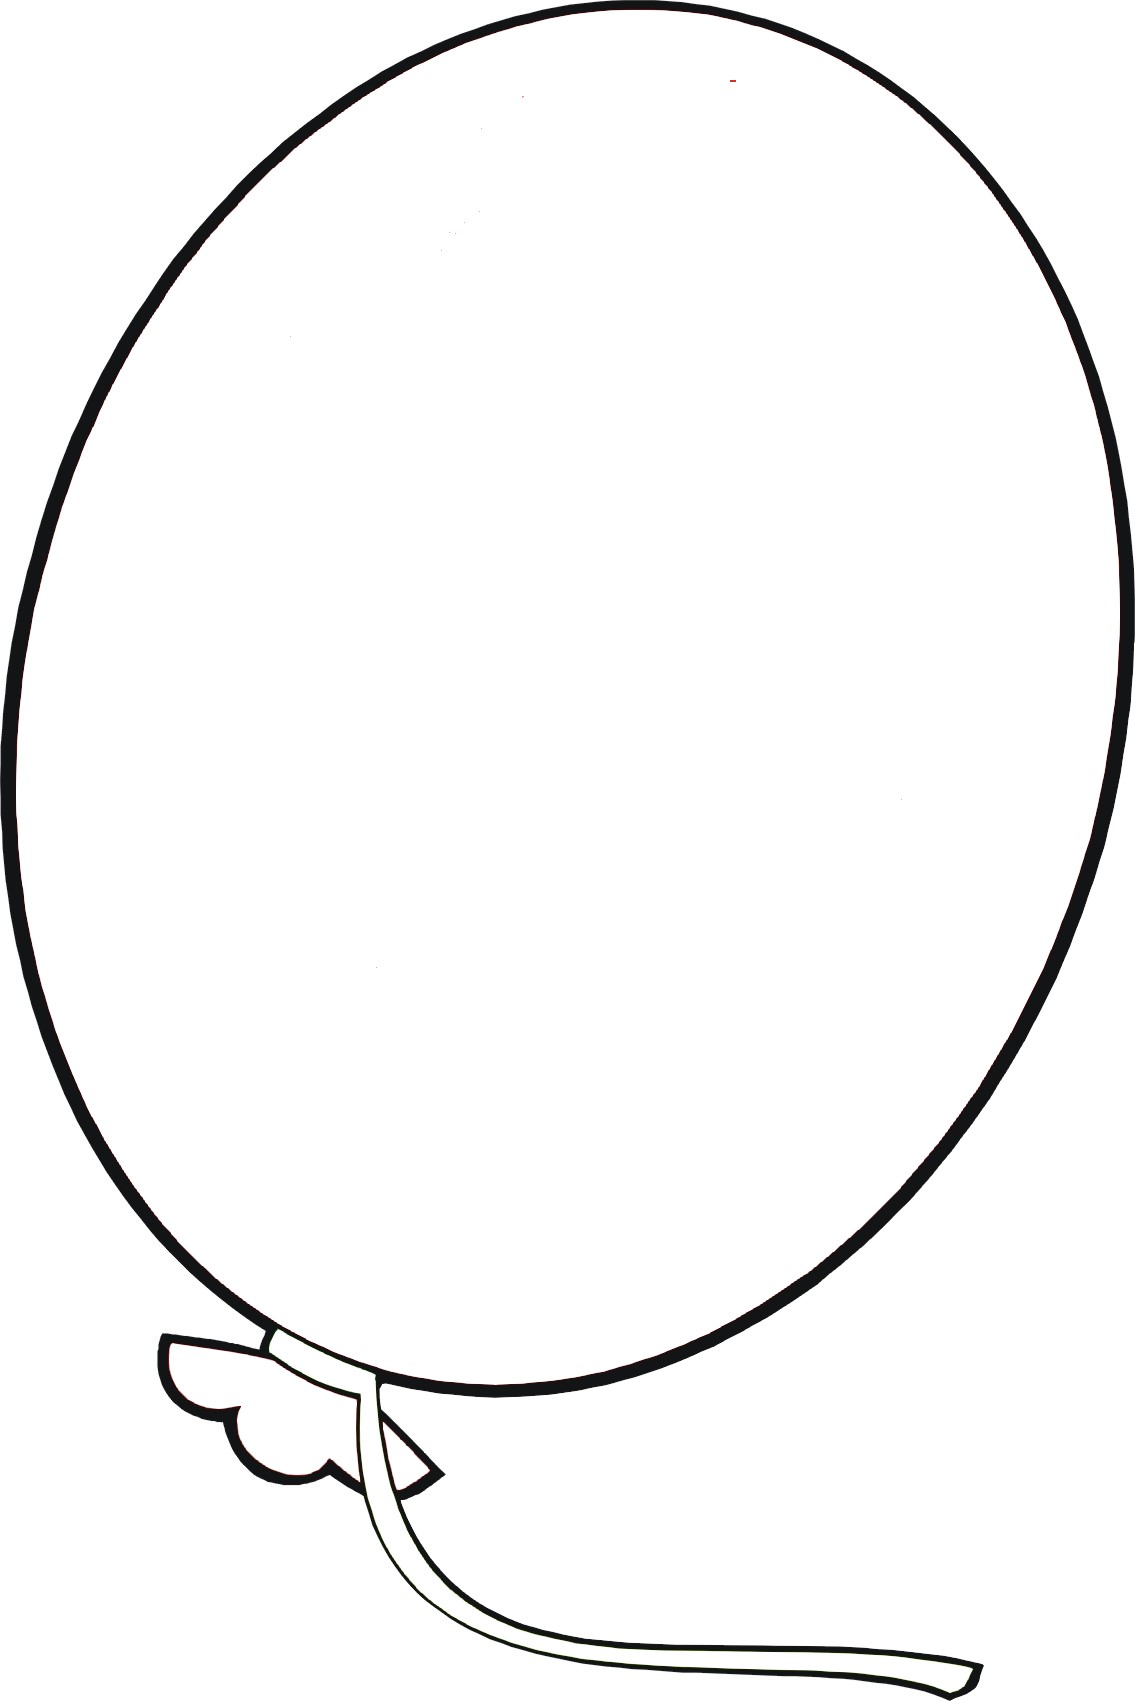 Balloon Coloring Pages Printable at GetDrawings Free download